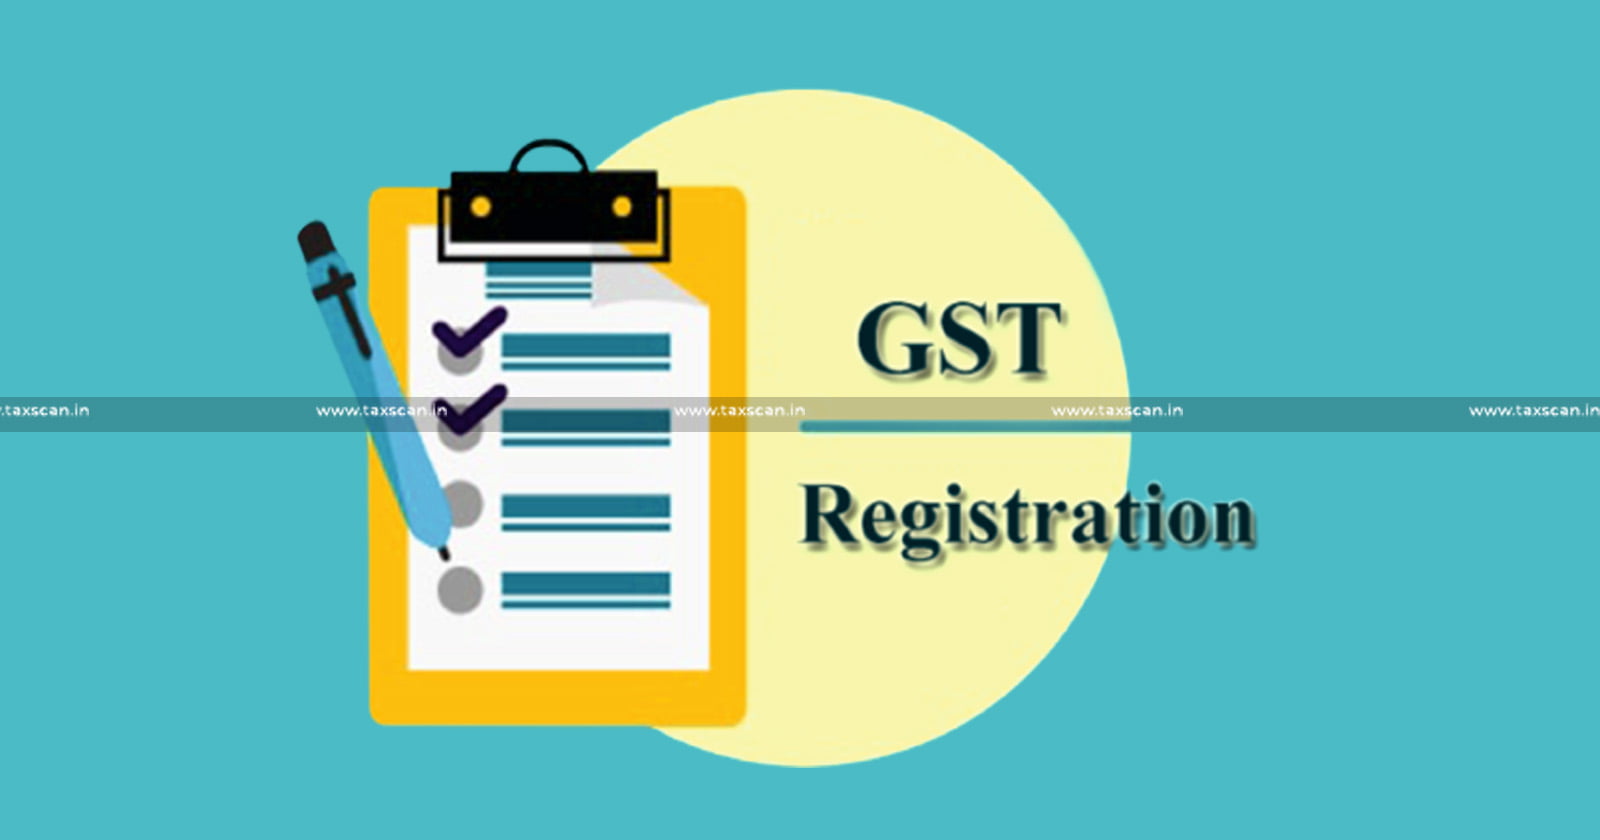 No Cancellation of GST Registration by merely describing Firm as Bogus - Allahabad HC directs to issue Fresh Notice us 29(2) of UP GST Act - TAXSCAN